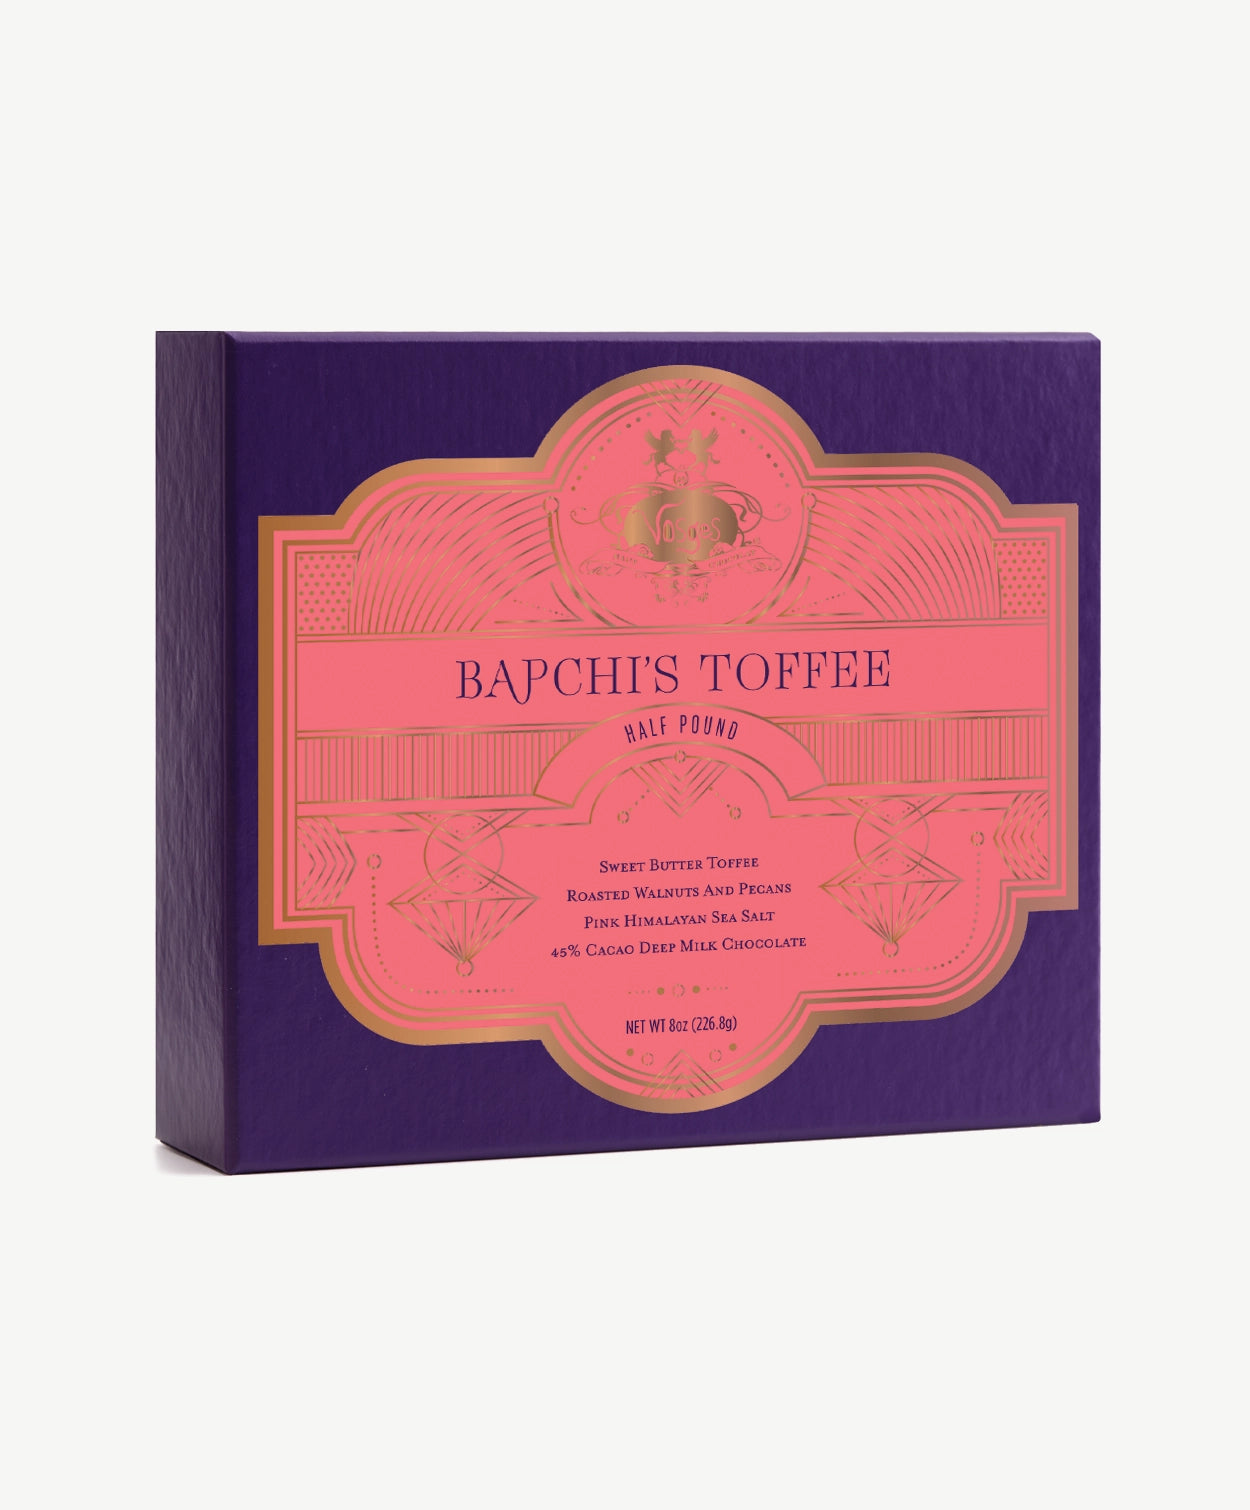 Purple Vosges chocolate box with a pink label reading, "Bapchi's Toffee" stands upright on a light grey background.